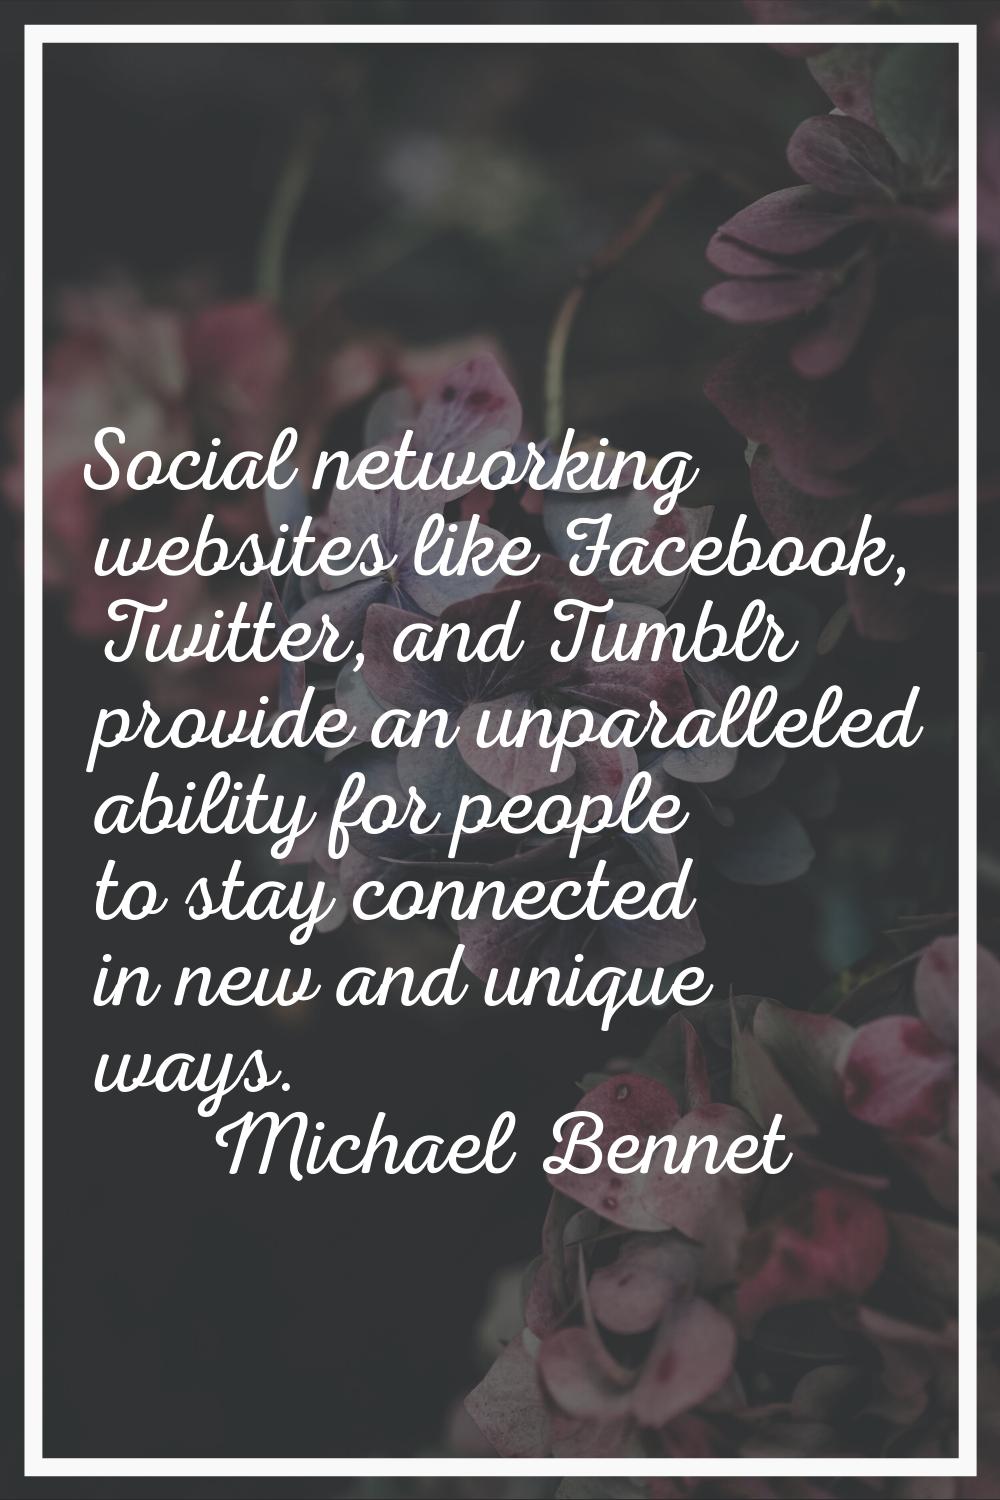 Social networking websites like Facebook, Twitter, and Tumblr provide an unparalleled ability for p